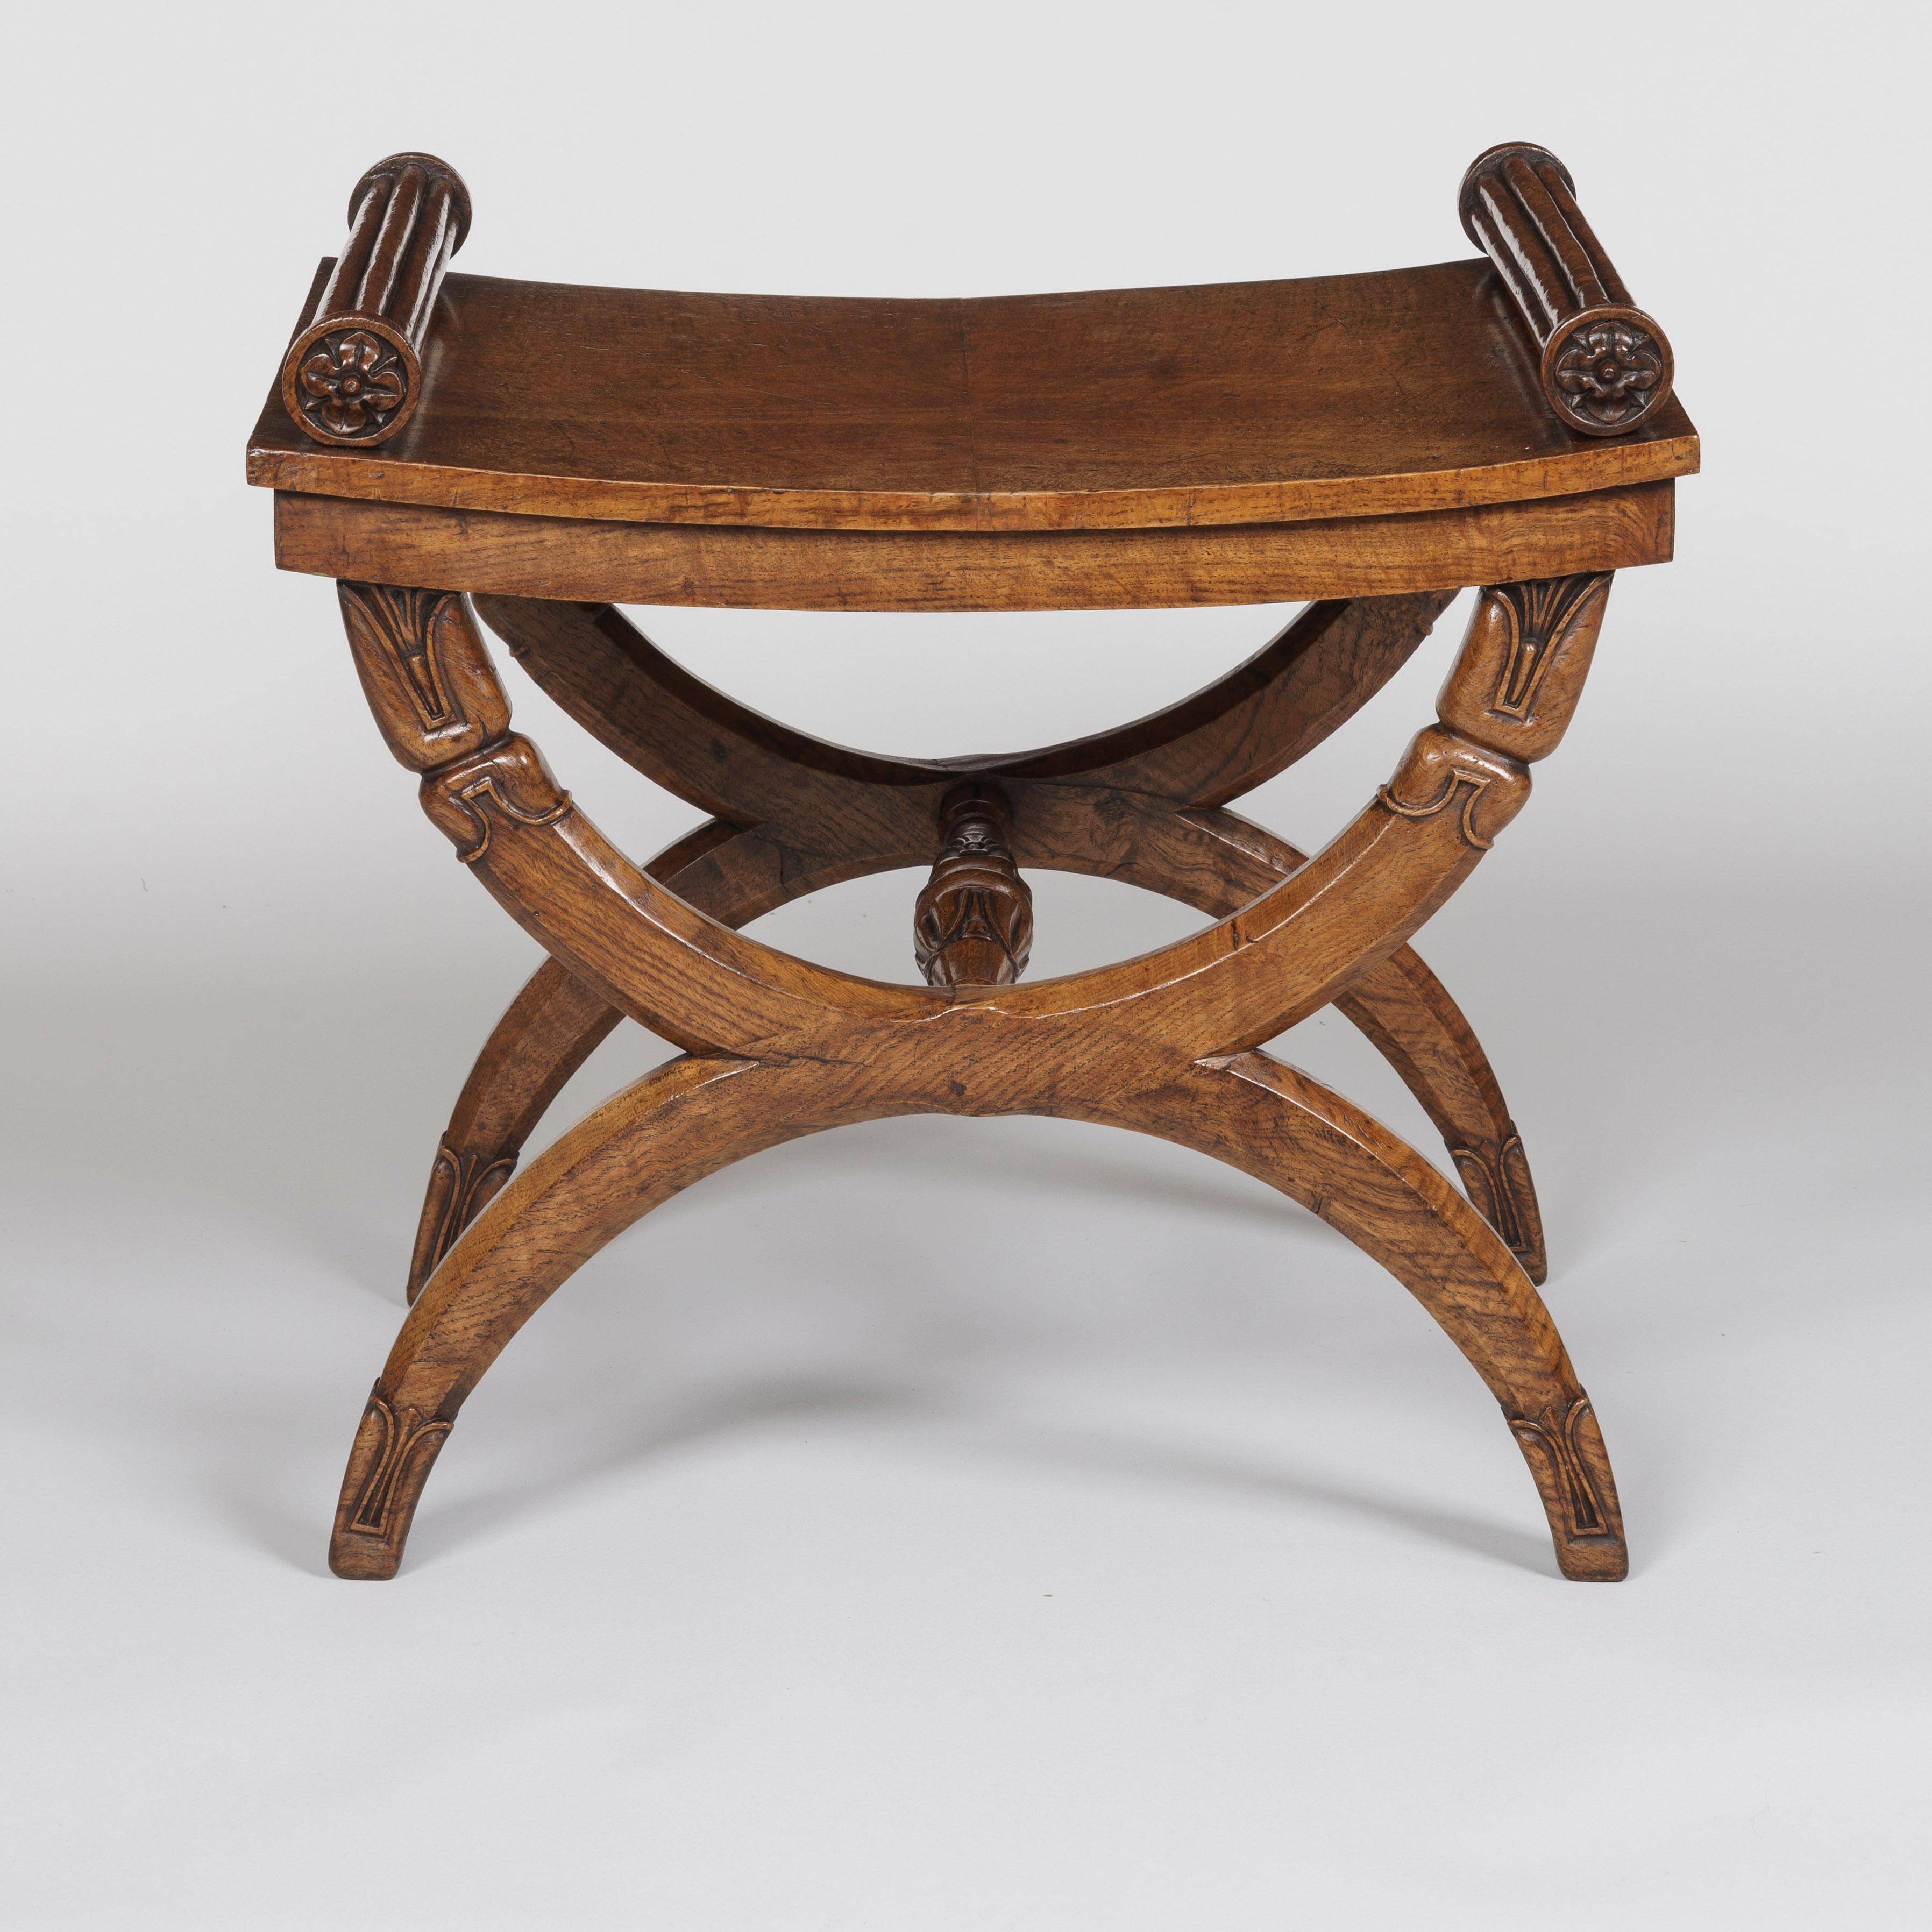 A Regency period X-frame stool
Possibly by George Bullock

Constructed from indigenous oak--a wood typically used by the renowned cabinetmaker George Bullock--this stool of elegant proportions supported on x-frame supports carved with lotus ends